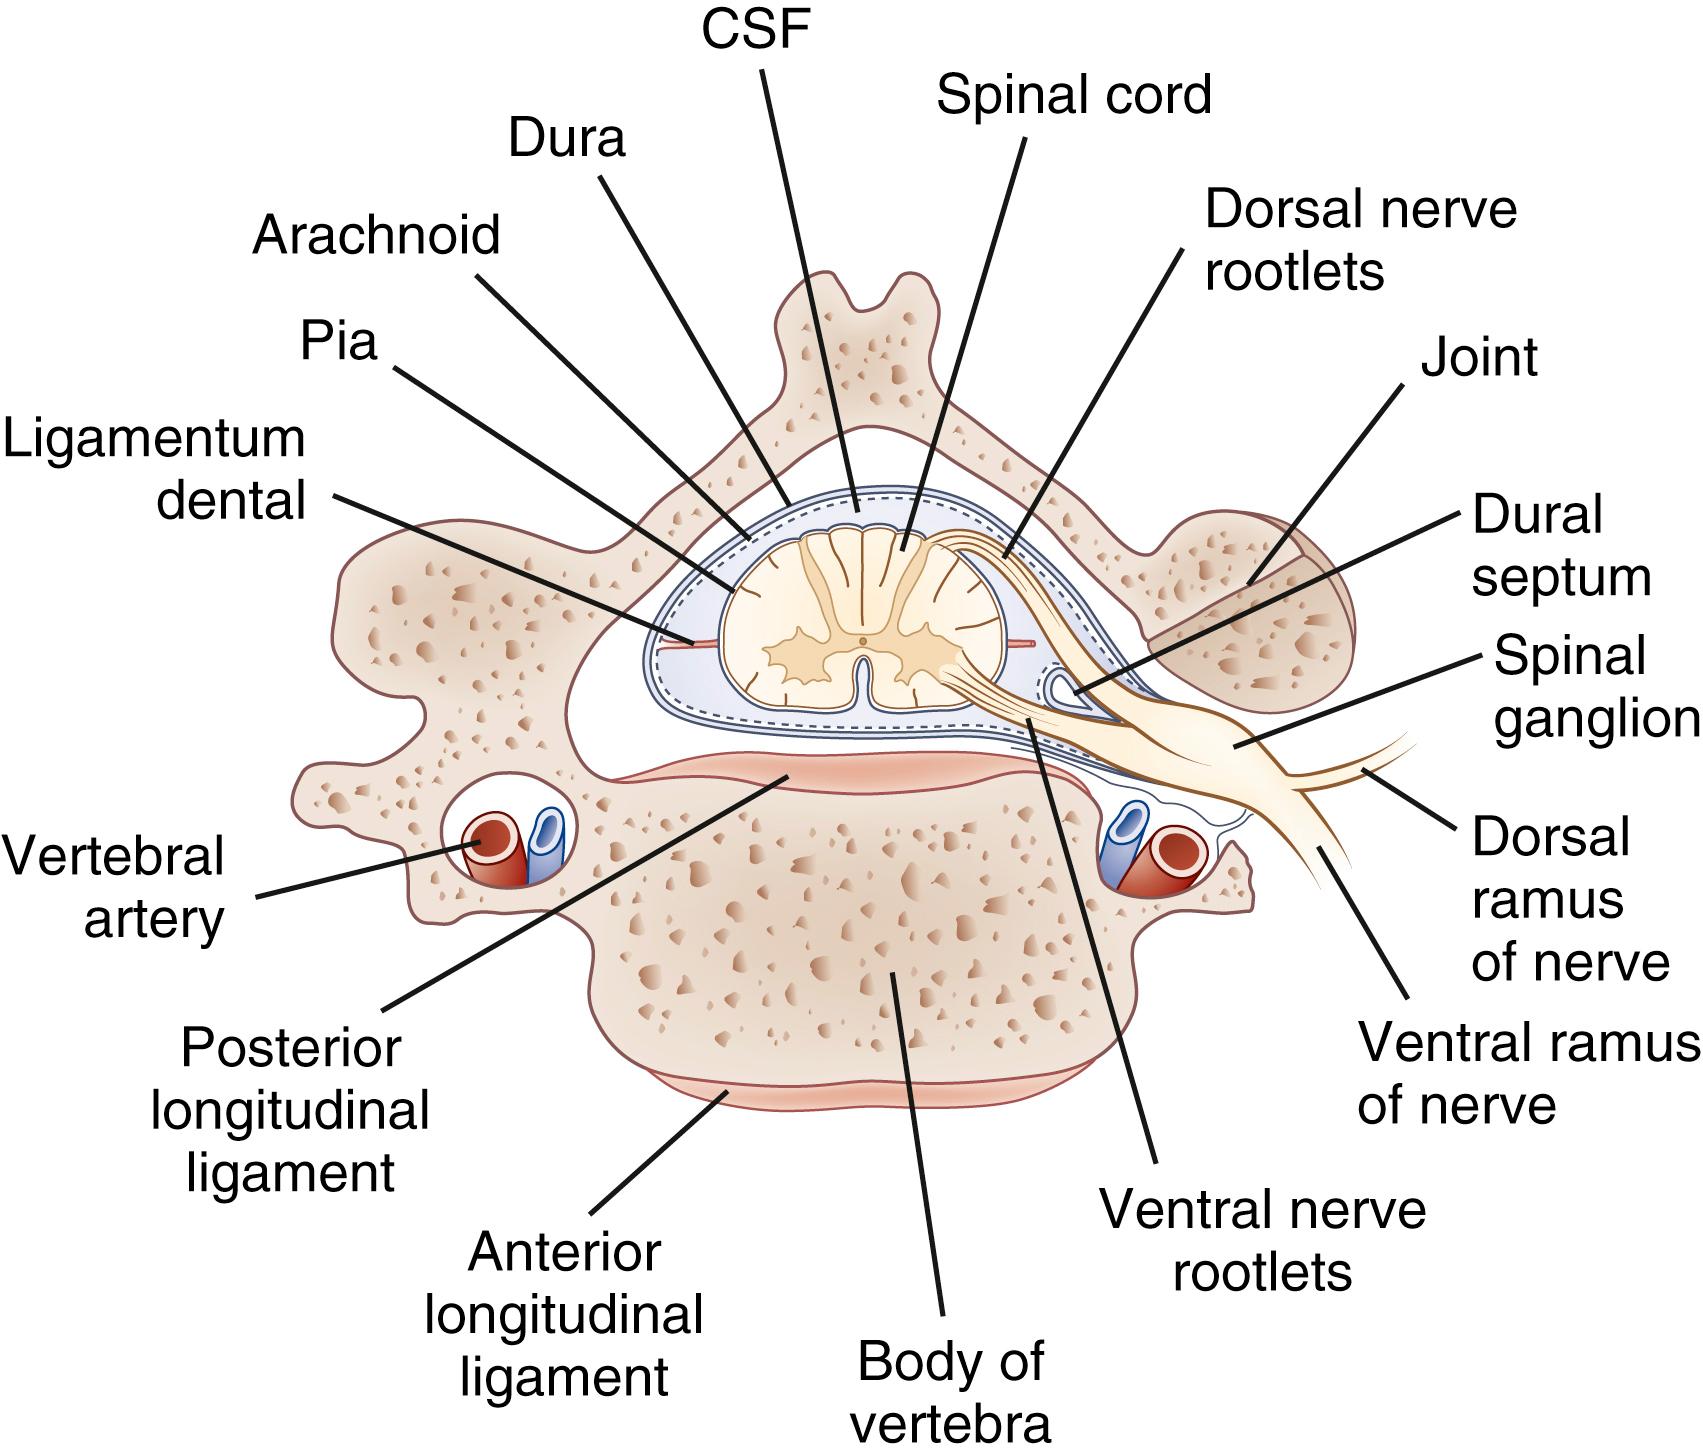 Fig. 105.1, Relations of Dura to Bone and Roots of Nerve Shown in an Oblique Transverse Section.